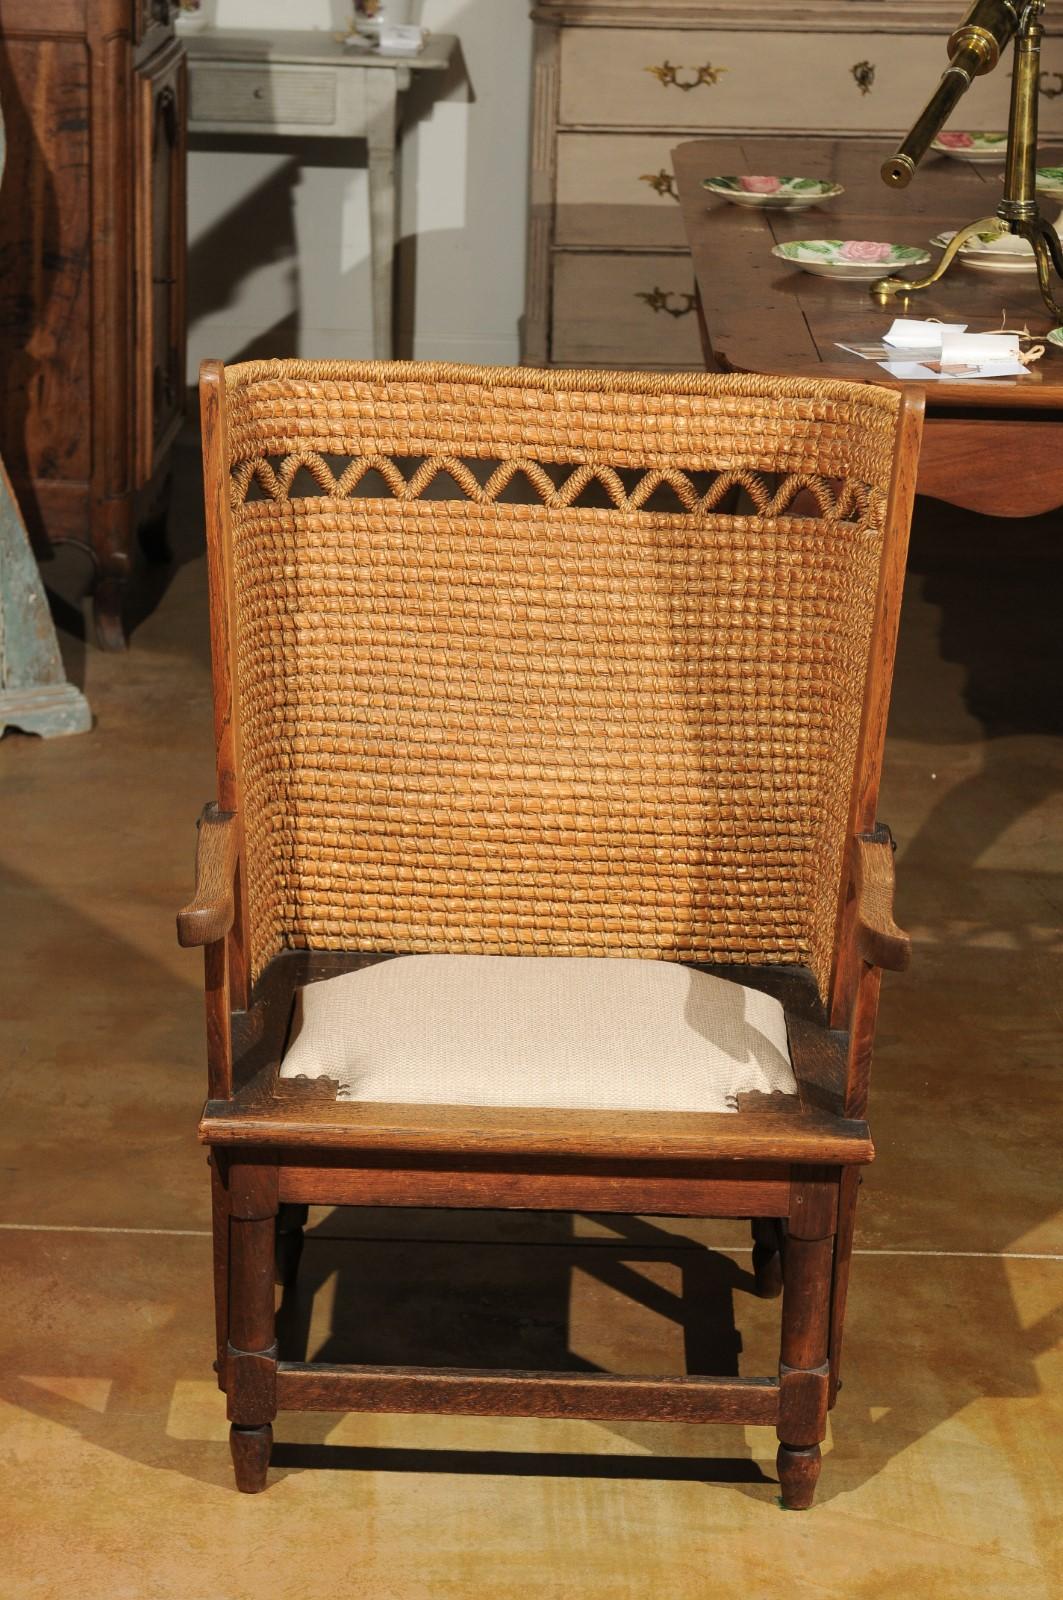 19th Century Scottish Orkney Chair with Handwoven Straw Back and Zigzag Patterns 4